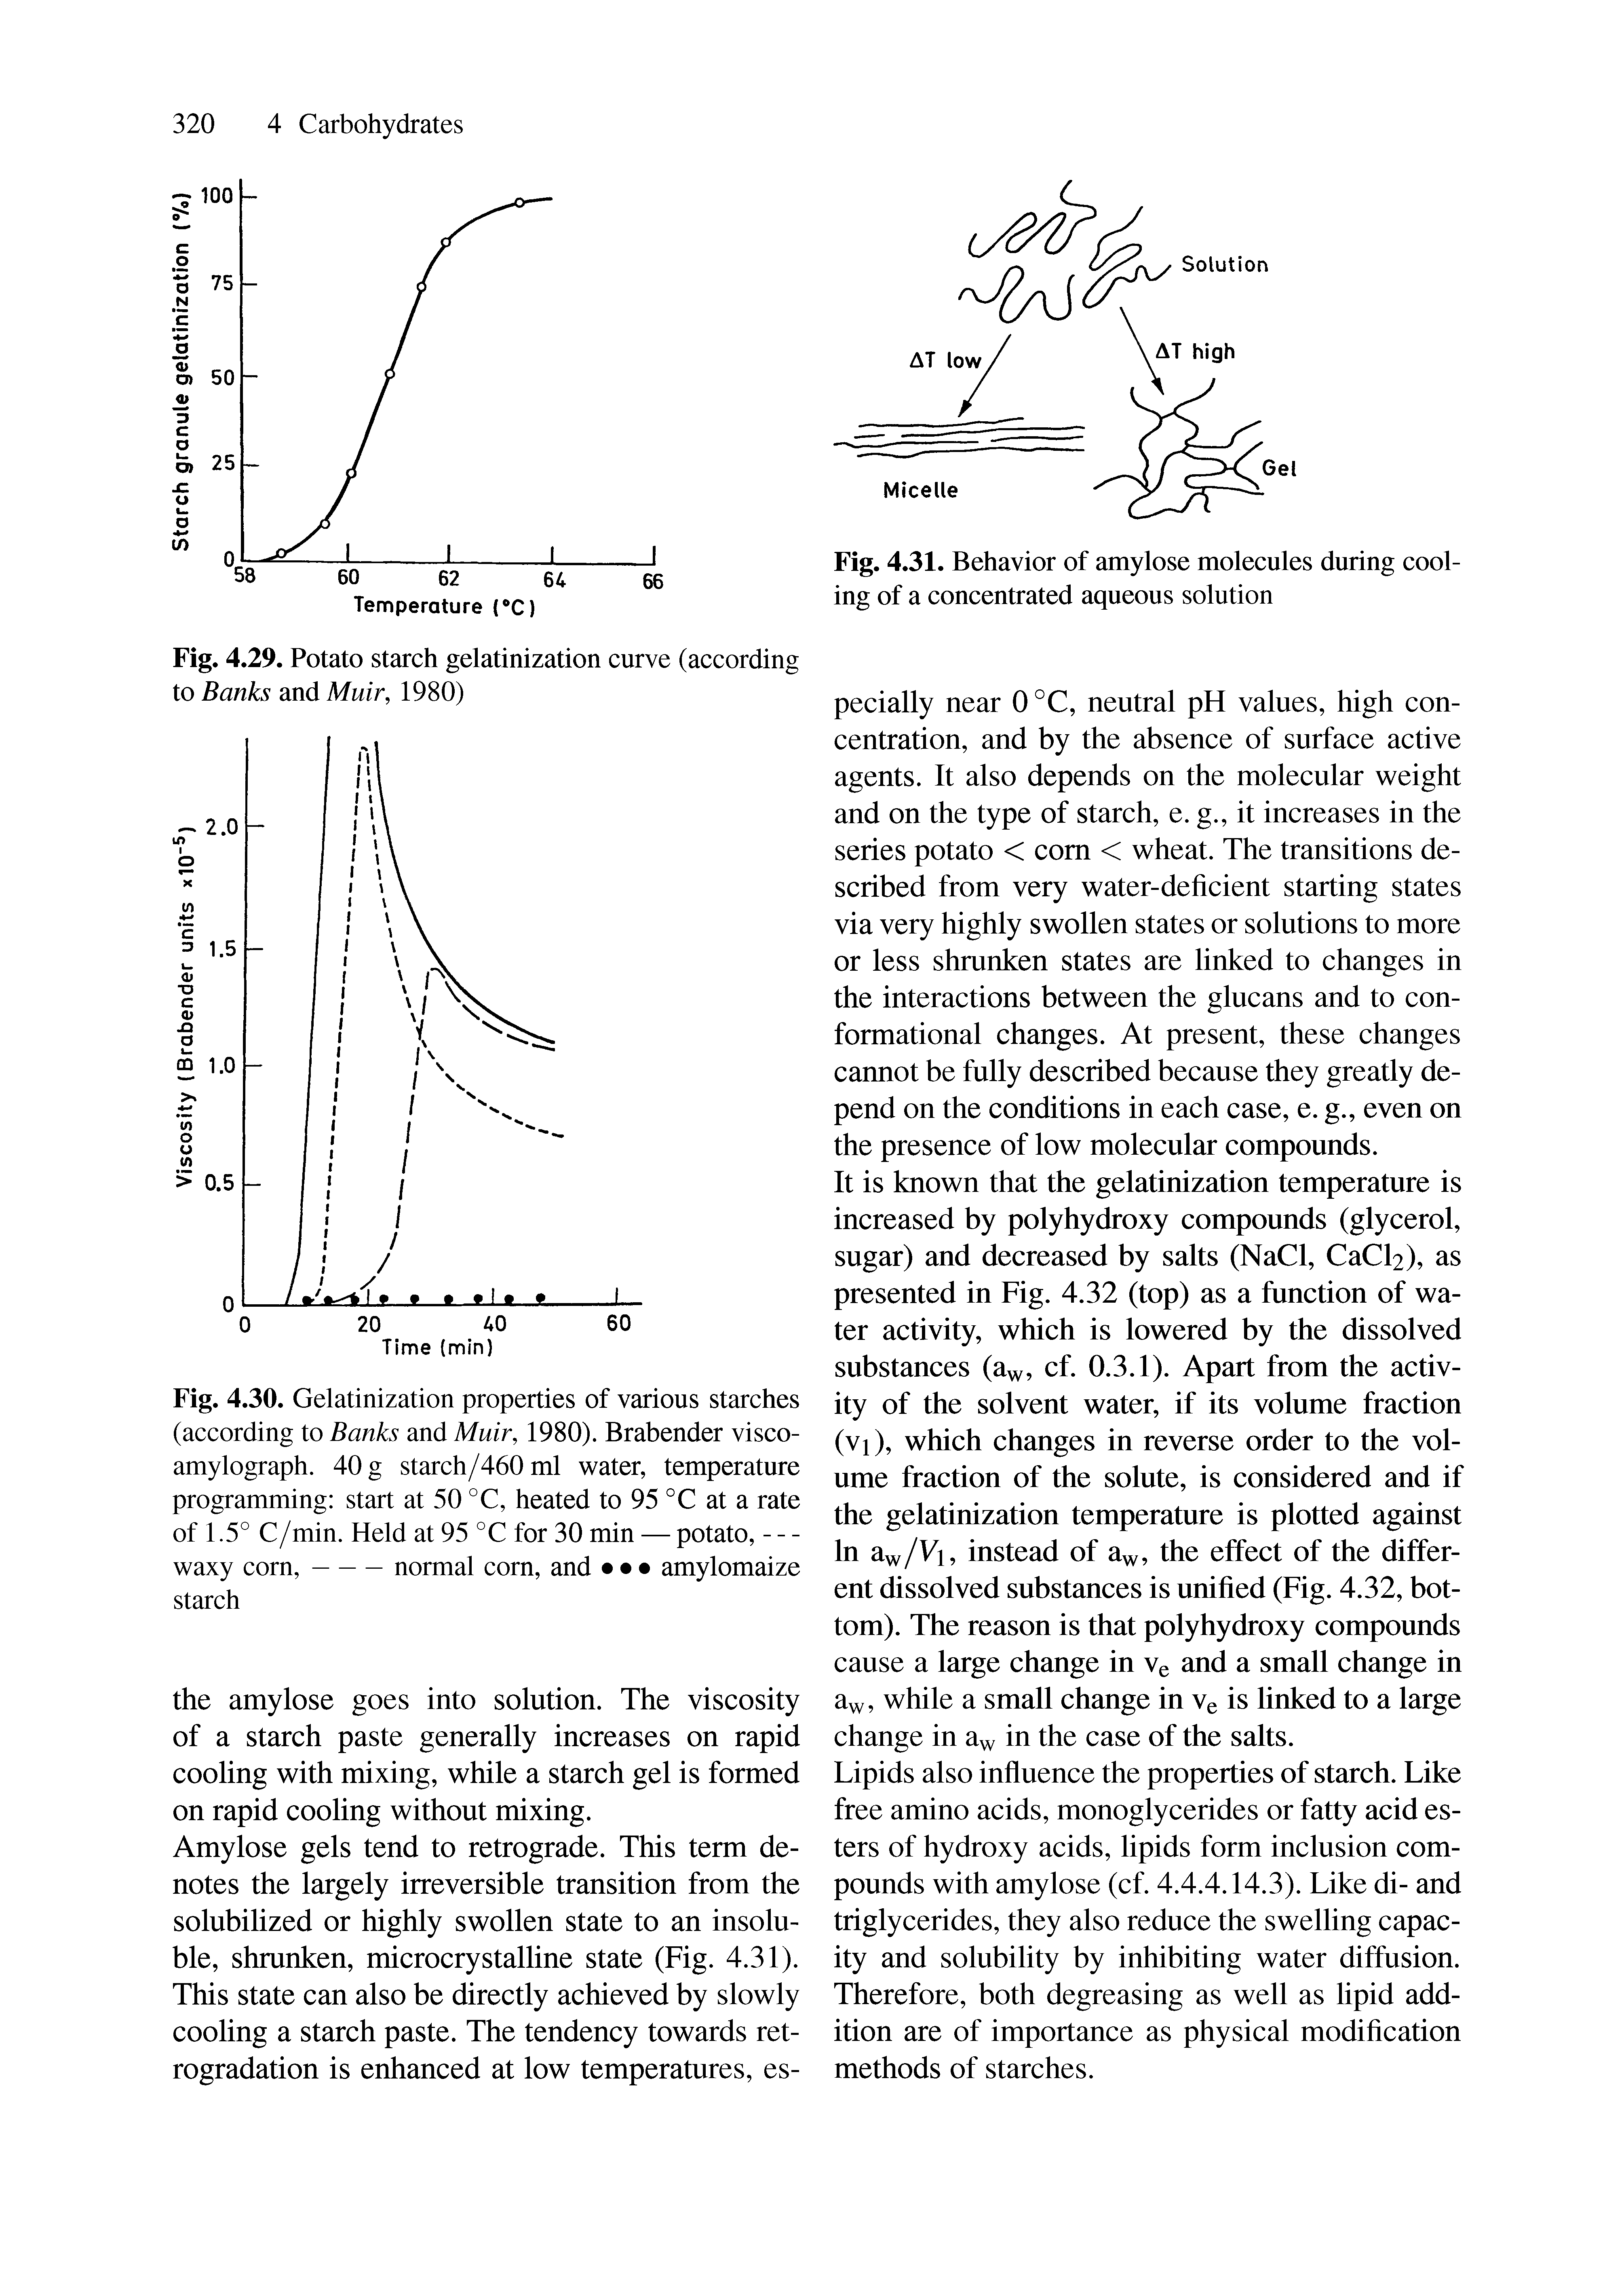 Fig. 4.29. Potato starch gelatinization curve (according to Banks and Muir, 1980)...